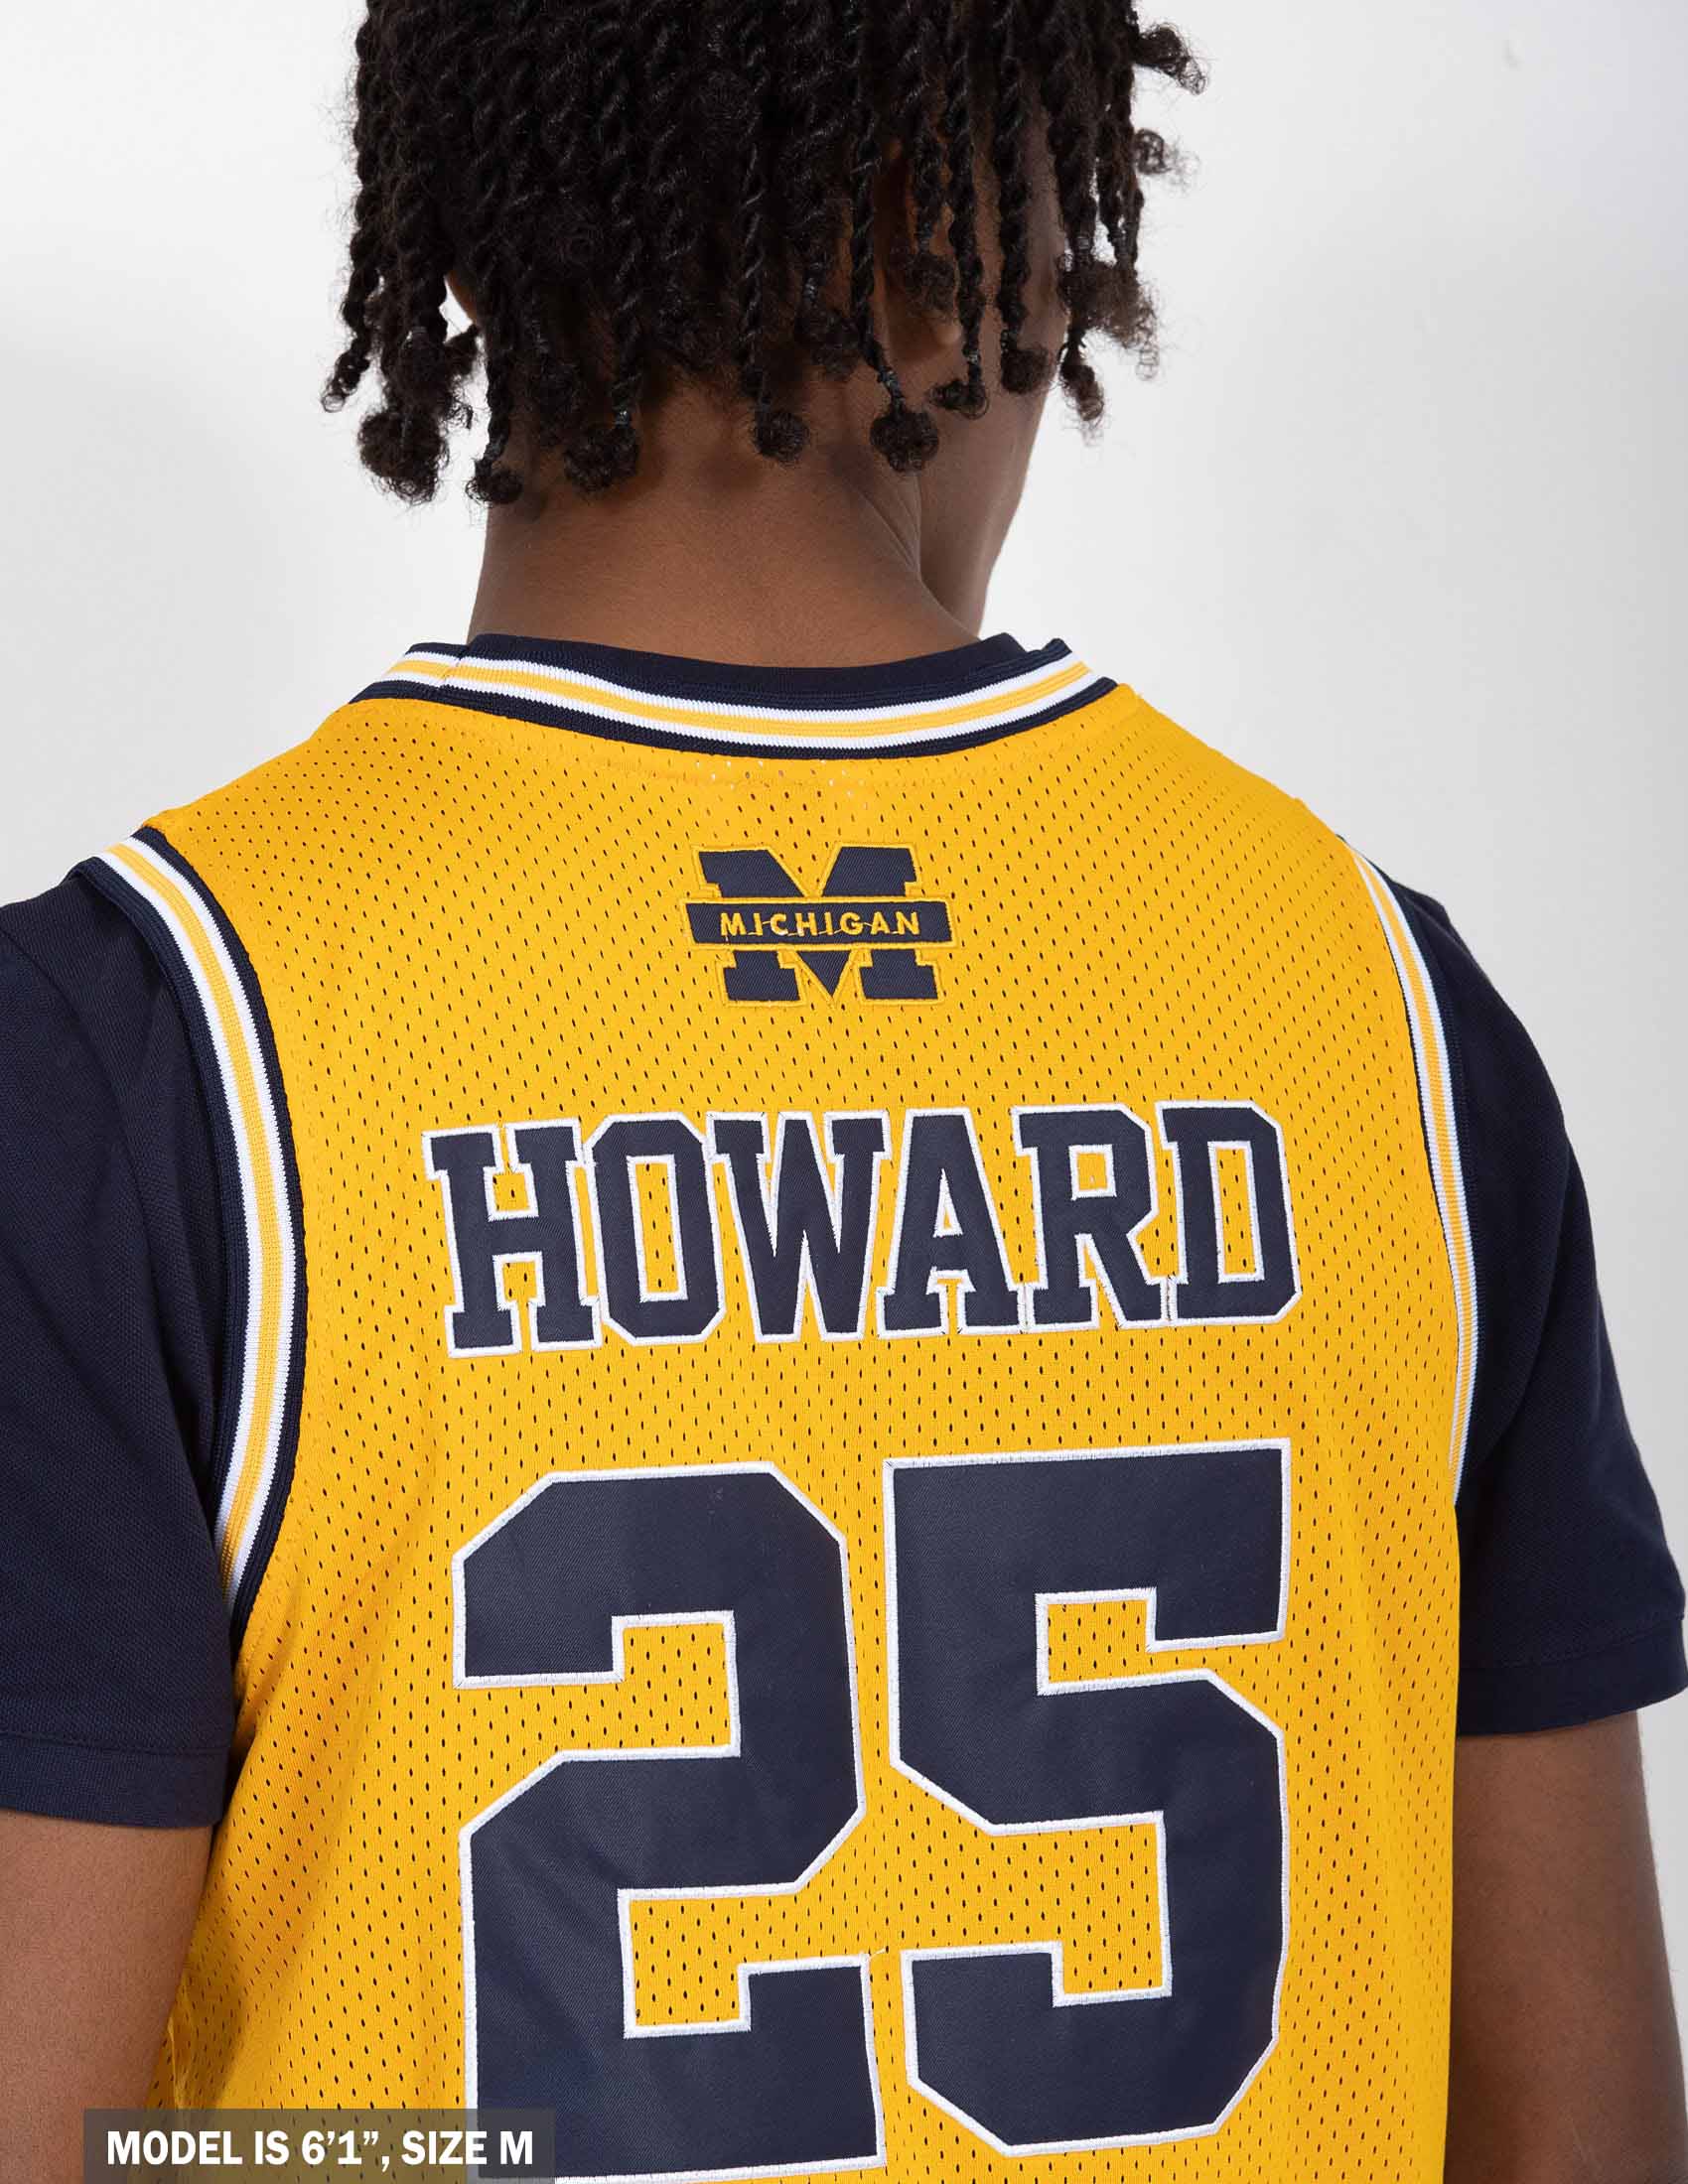 Michigan basketball to wear 1989 throwback uniforms against